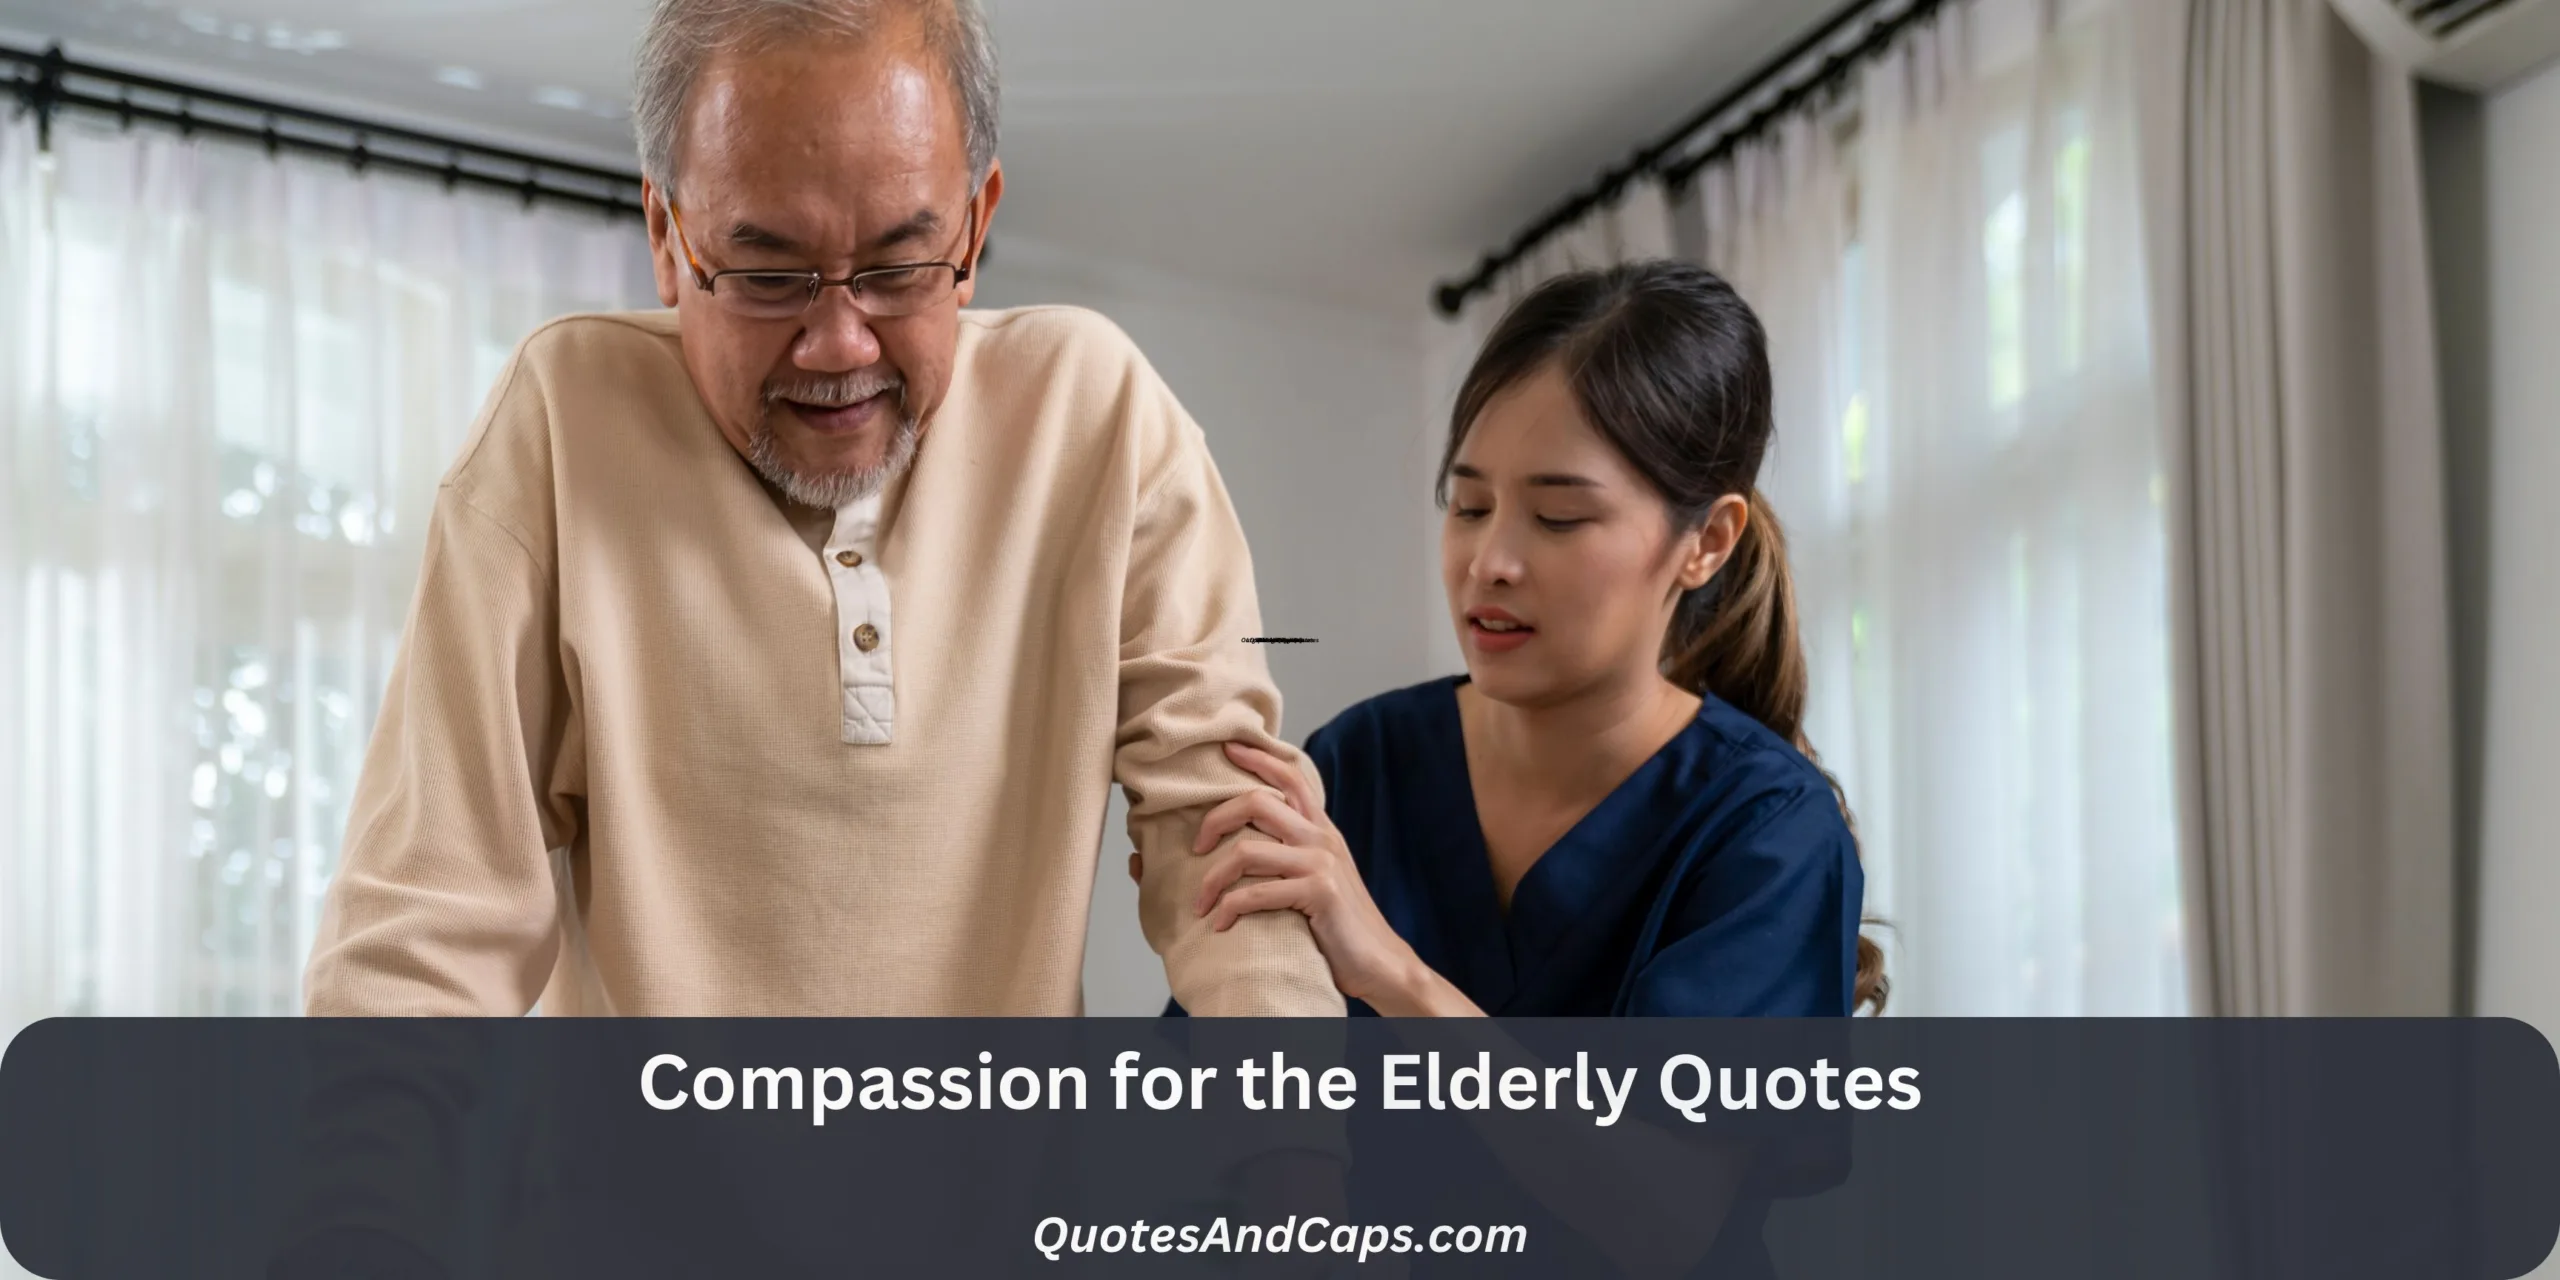 Compassion for the Elderly Quotes